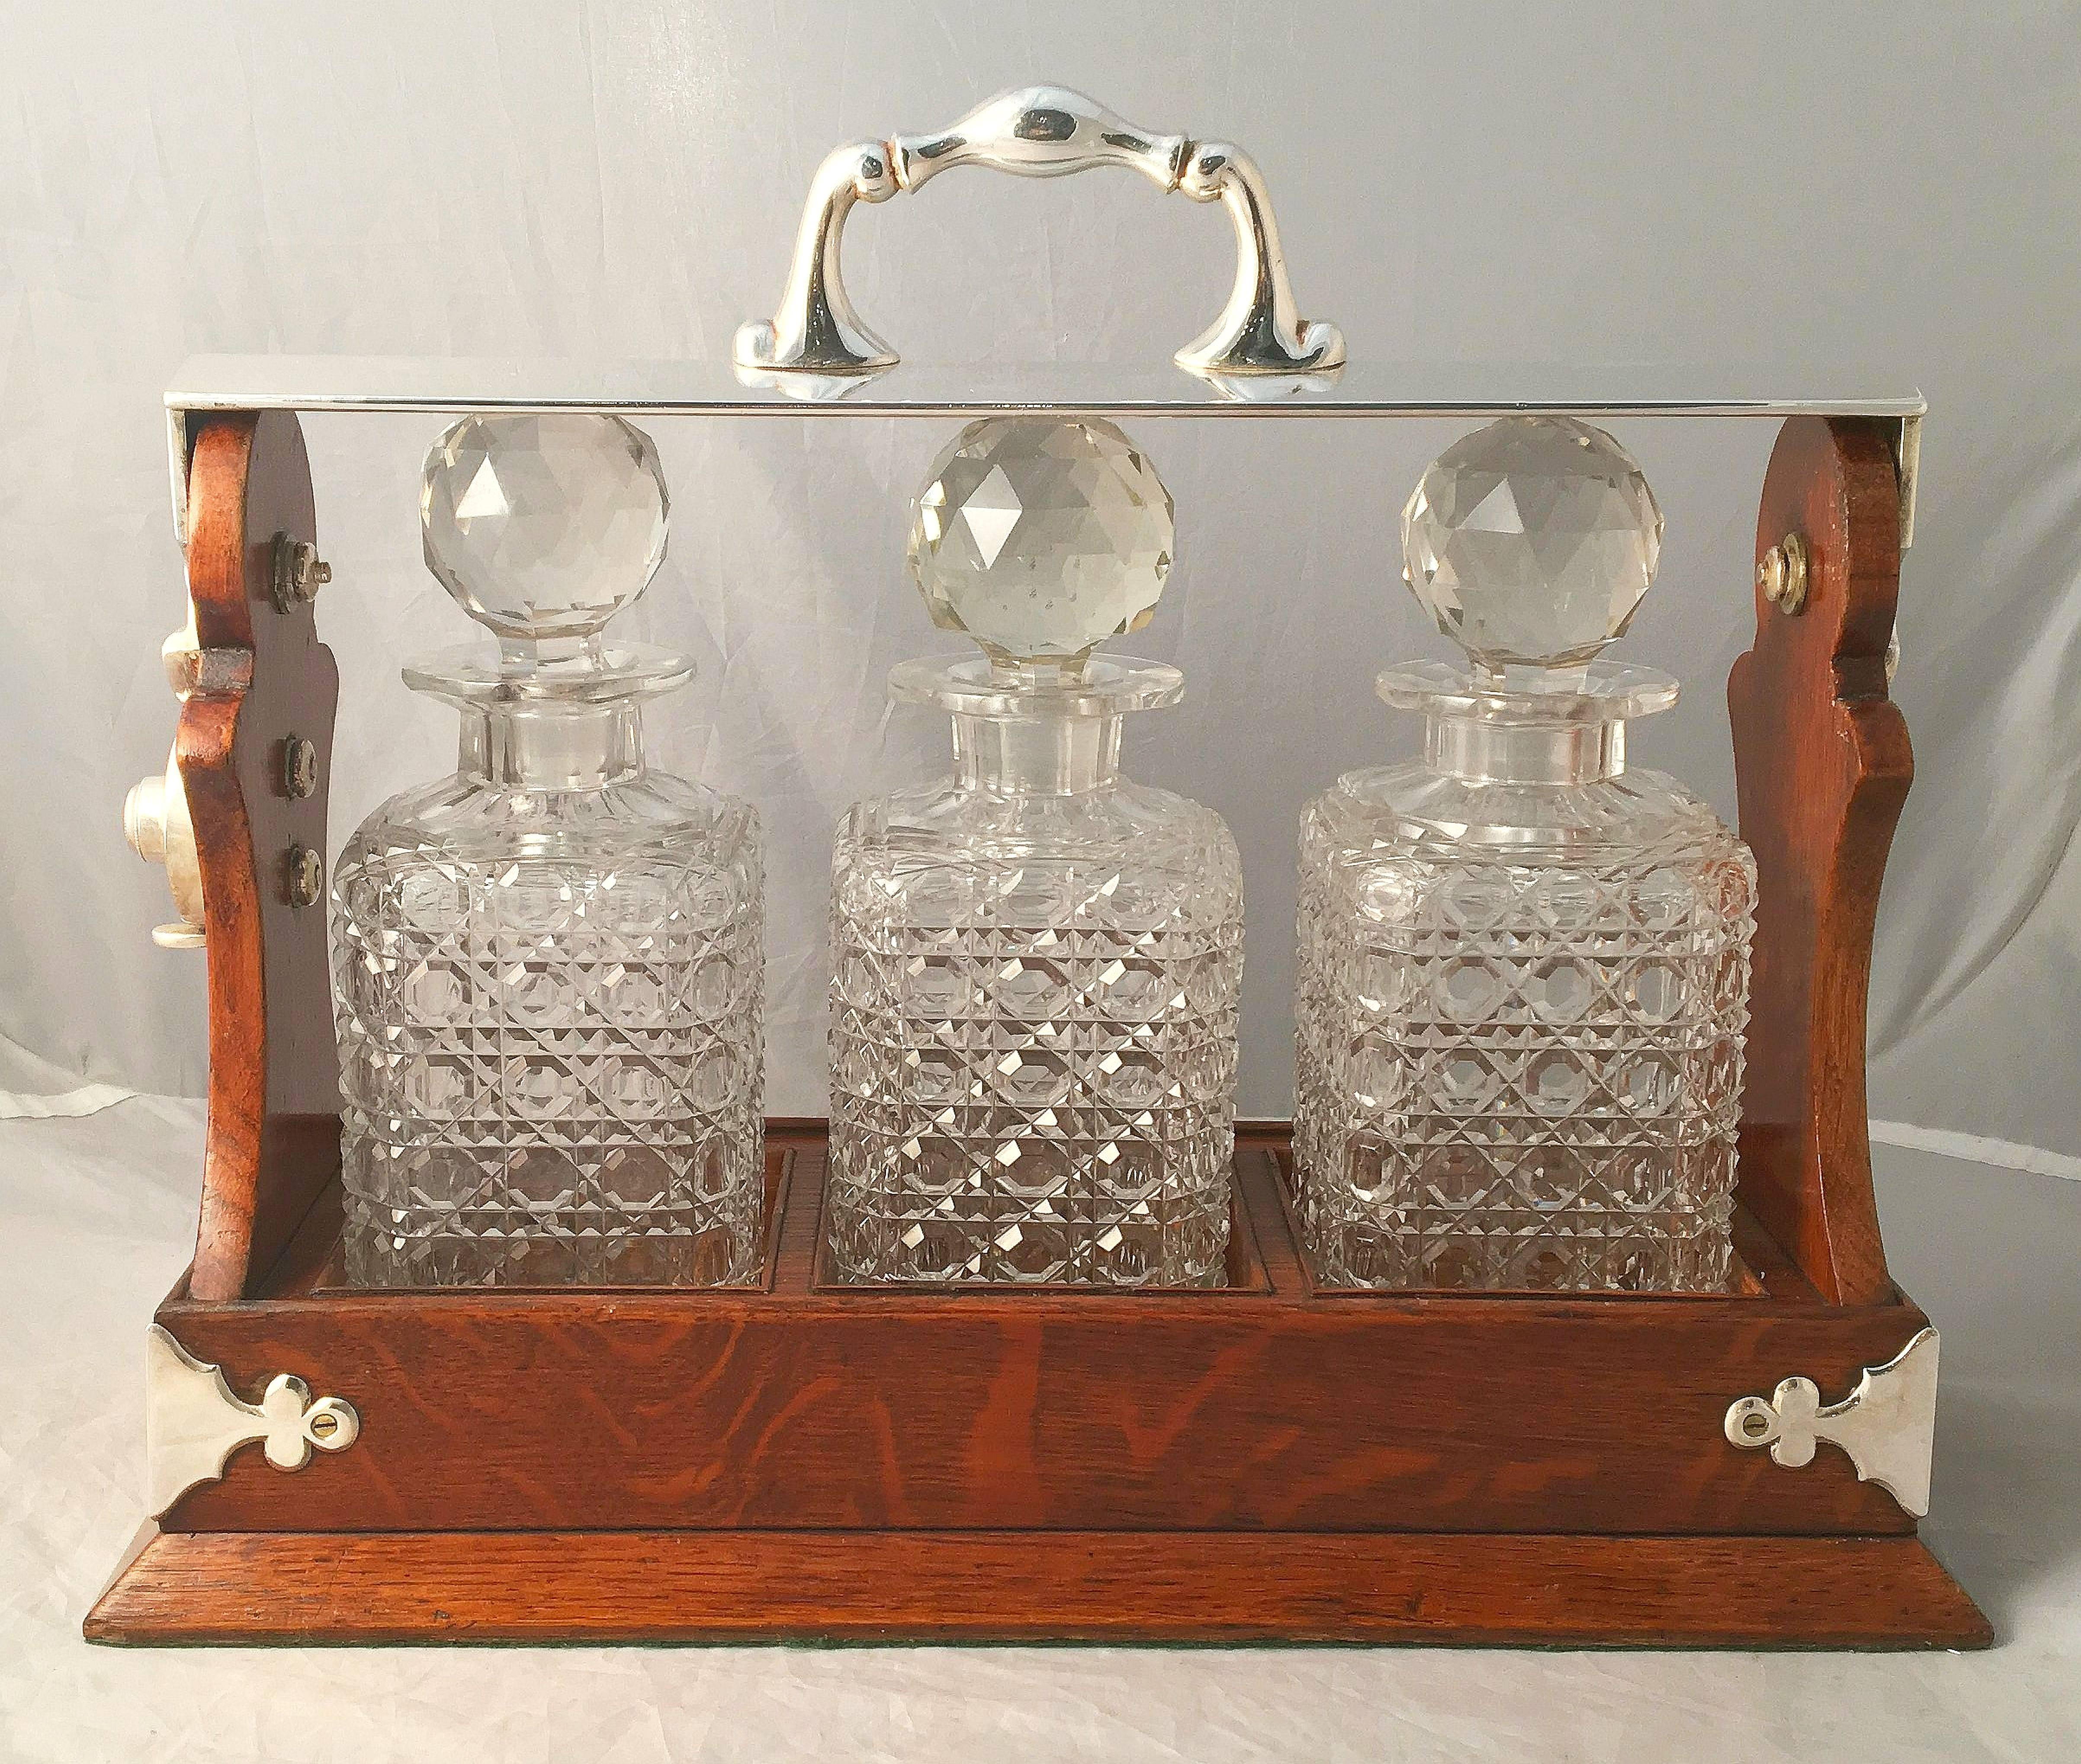 A fine English tantalus or decanter of oak, for whiskey and spirits, from the Edwardian era. 
Featuring Fine plate silver corner brackets, lock mechanism and sturdy carry handle. 
The frame of oak with three fitted cut-crystal decanters with